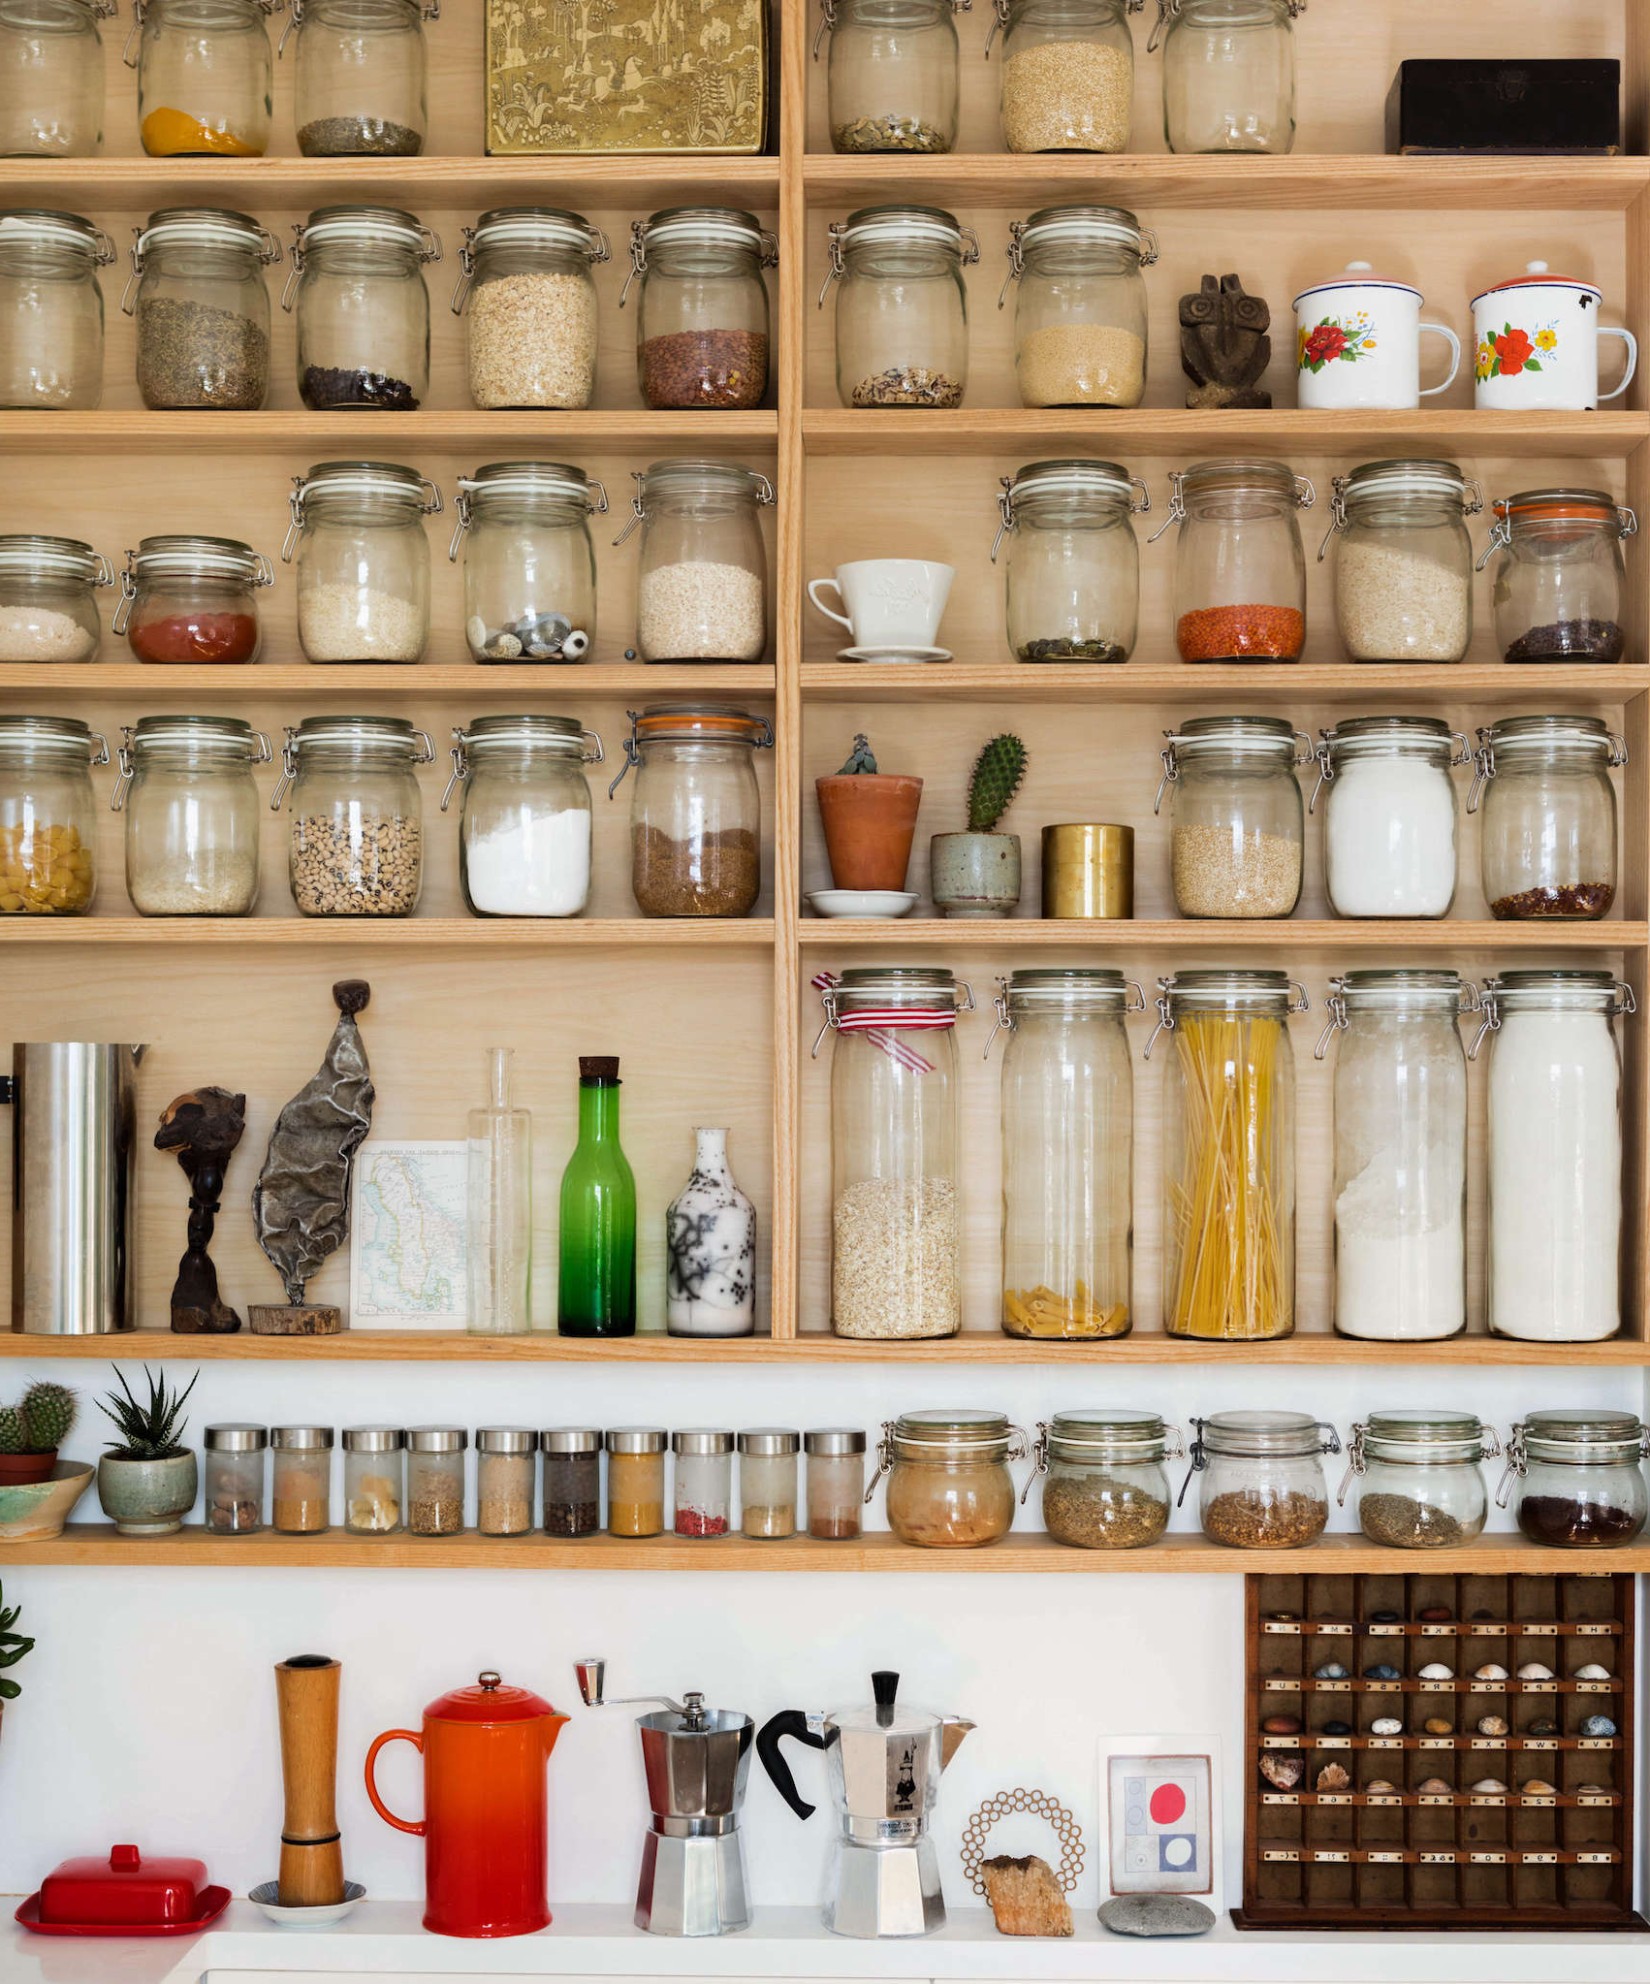 4 Tips for Maximizing Storage in a Tiny Kitchen